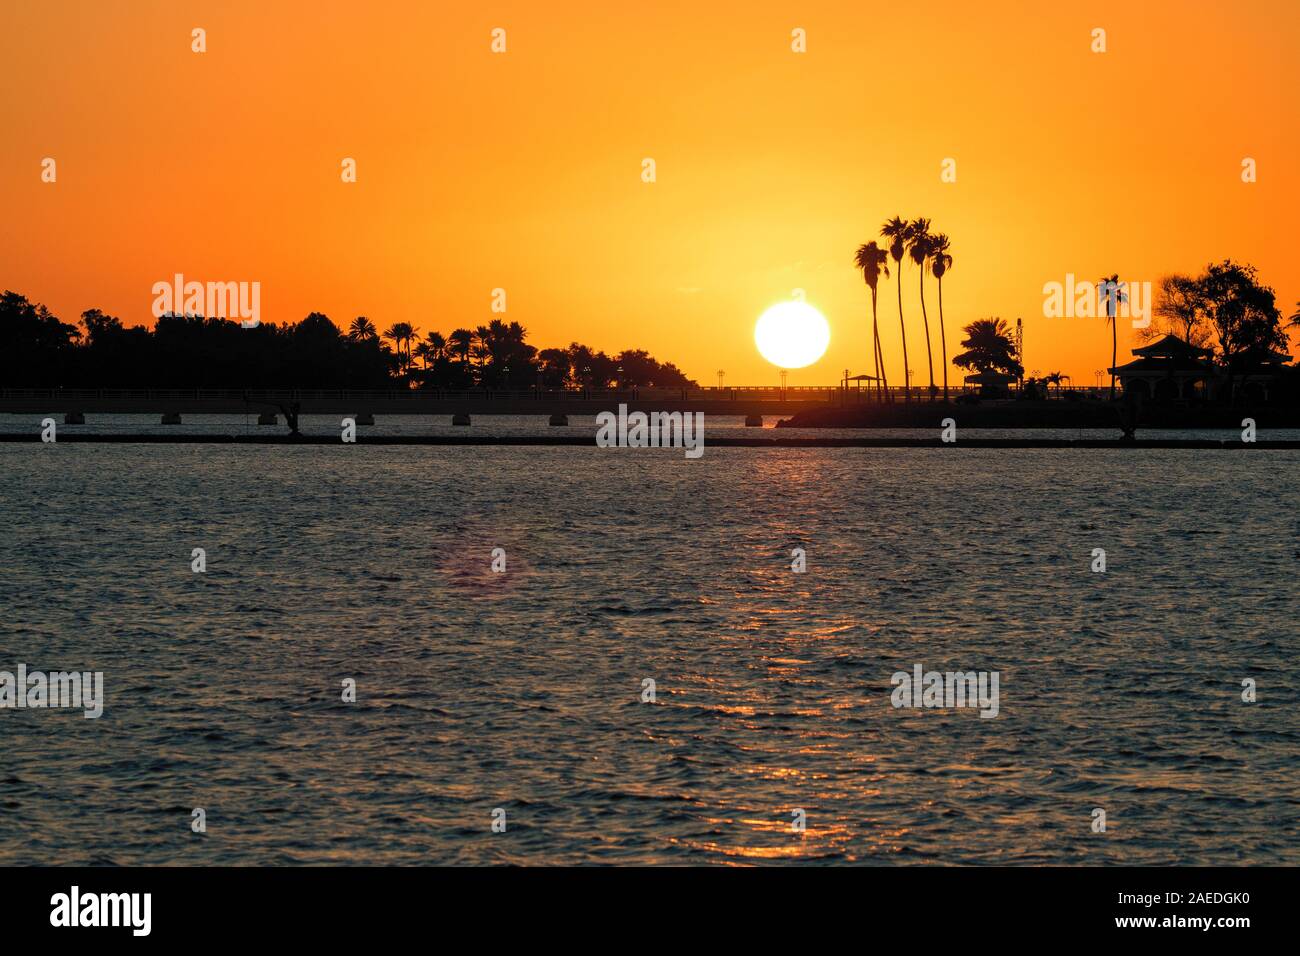 Scenic sunset with silhouettes of palm trees along the shore, seen from the South Corniche in Jeddah, Saudi Arabia Stock Photo